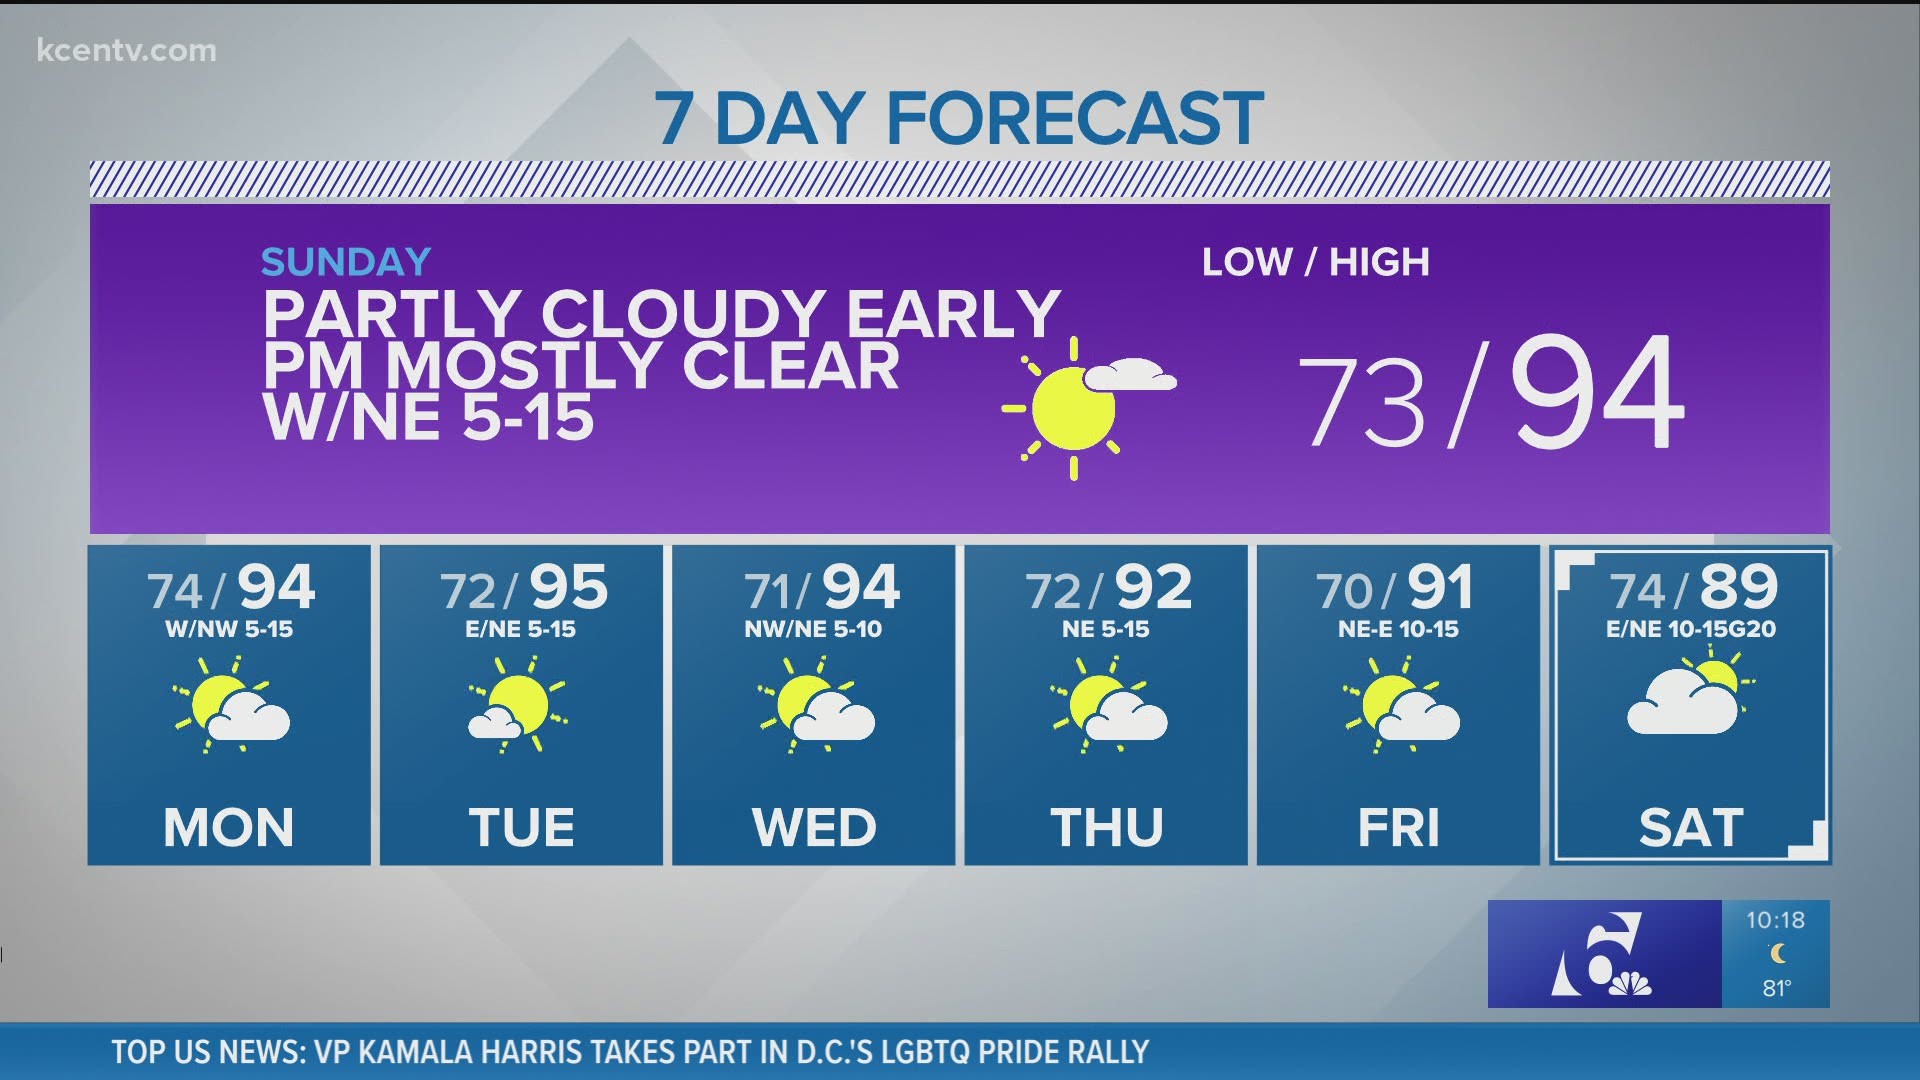 A hot week is right ahead with no rain in the forecast.